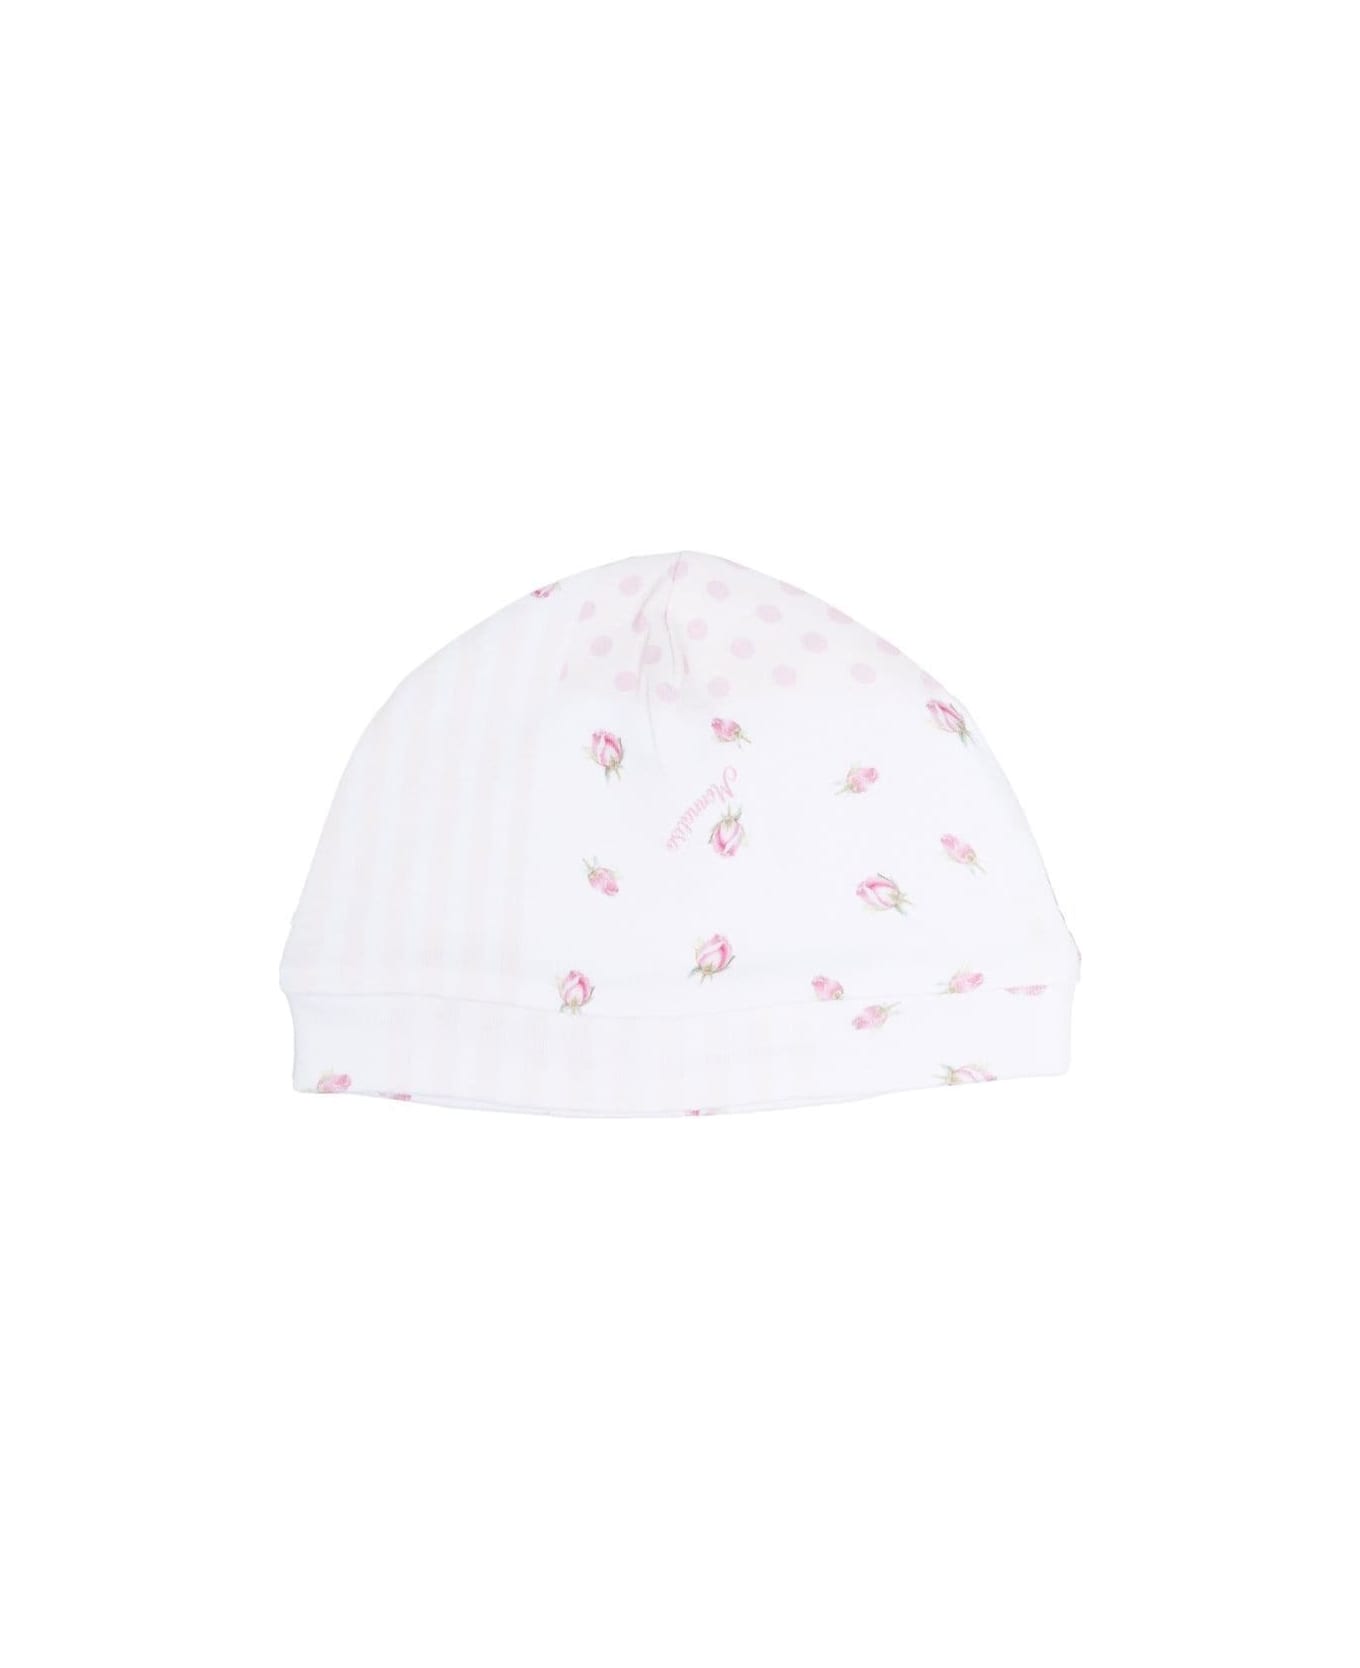 Monnalisa Pink And White Bonnet With Mixed Prints In Cotton Baby - White